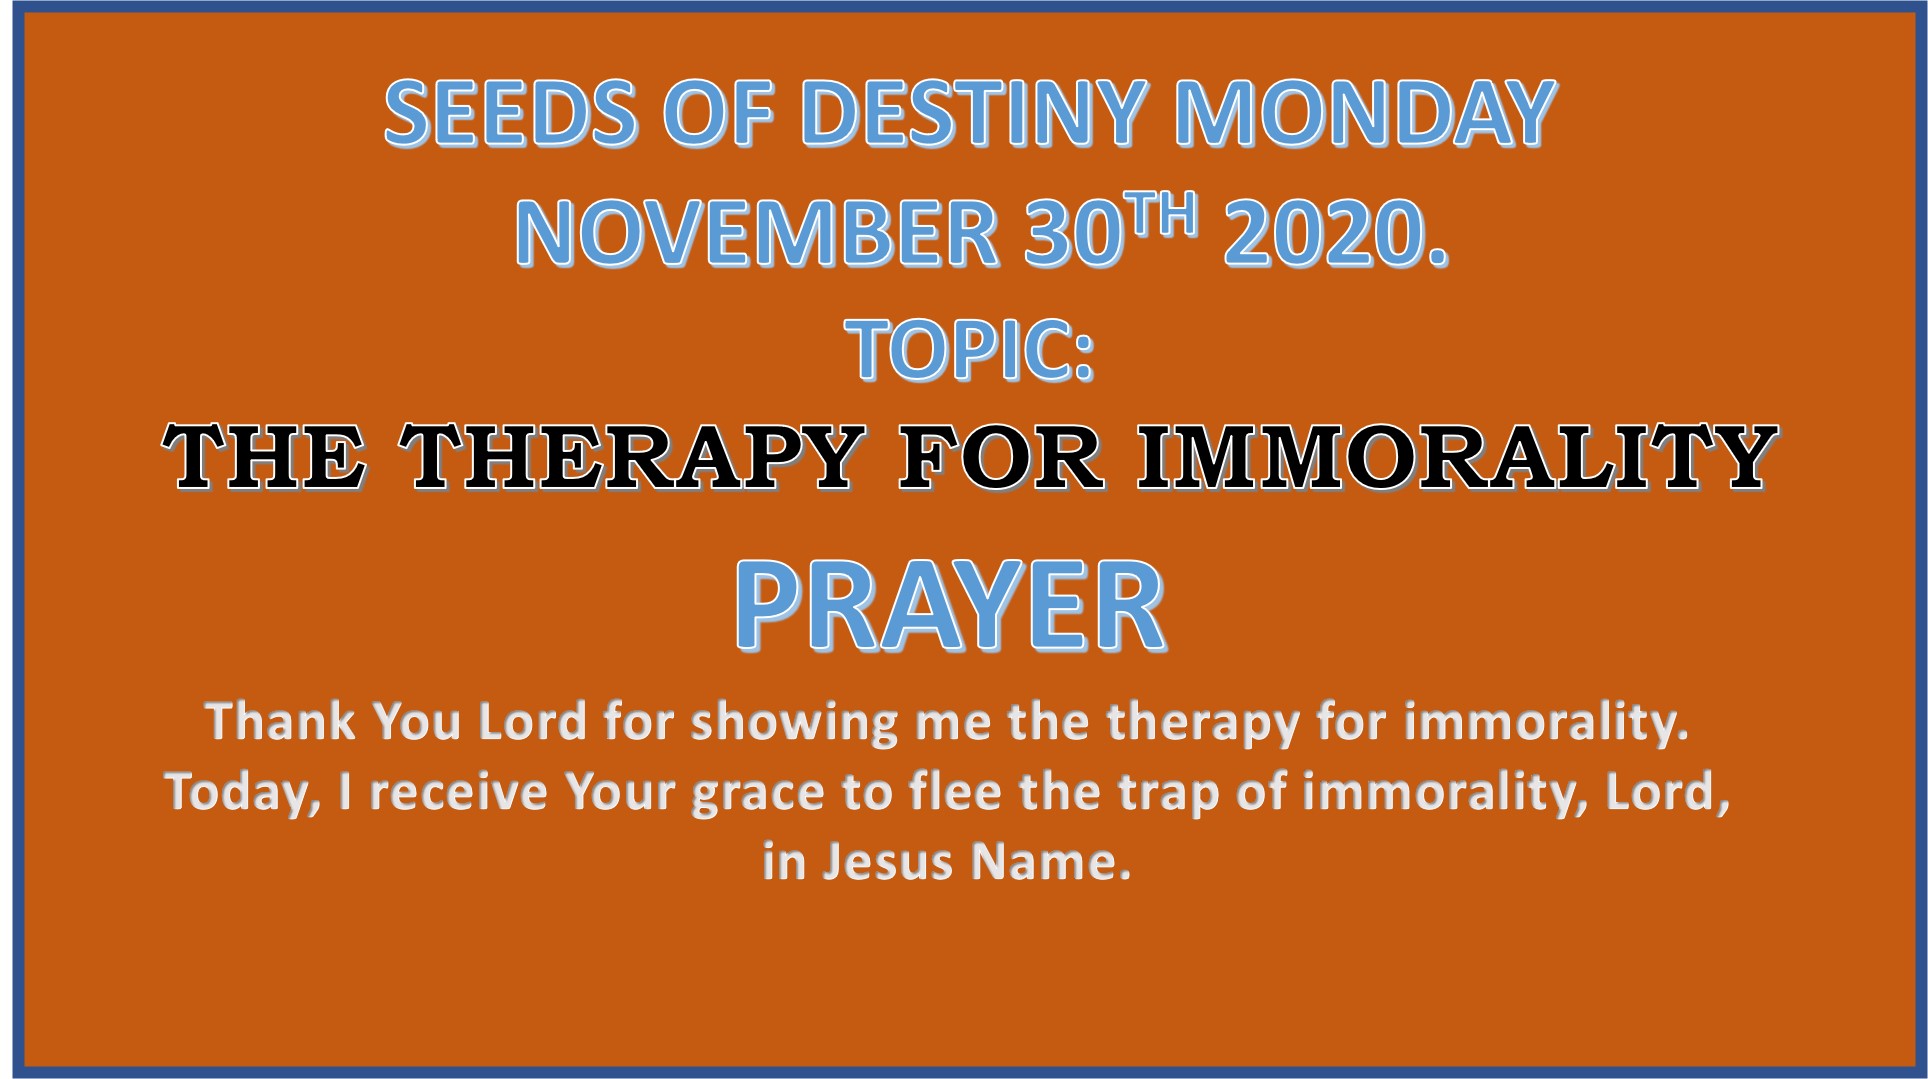 Seeds of Destiny Monday 30th November 2020 by Dr Paul Enenche